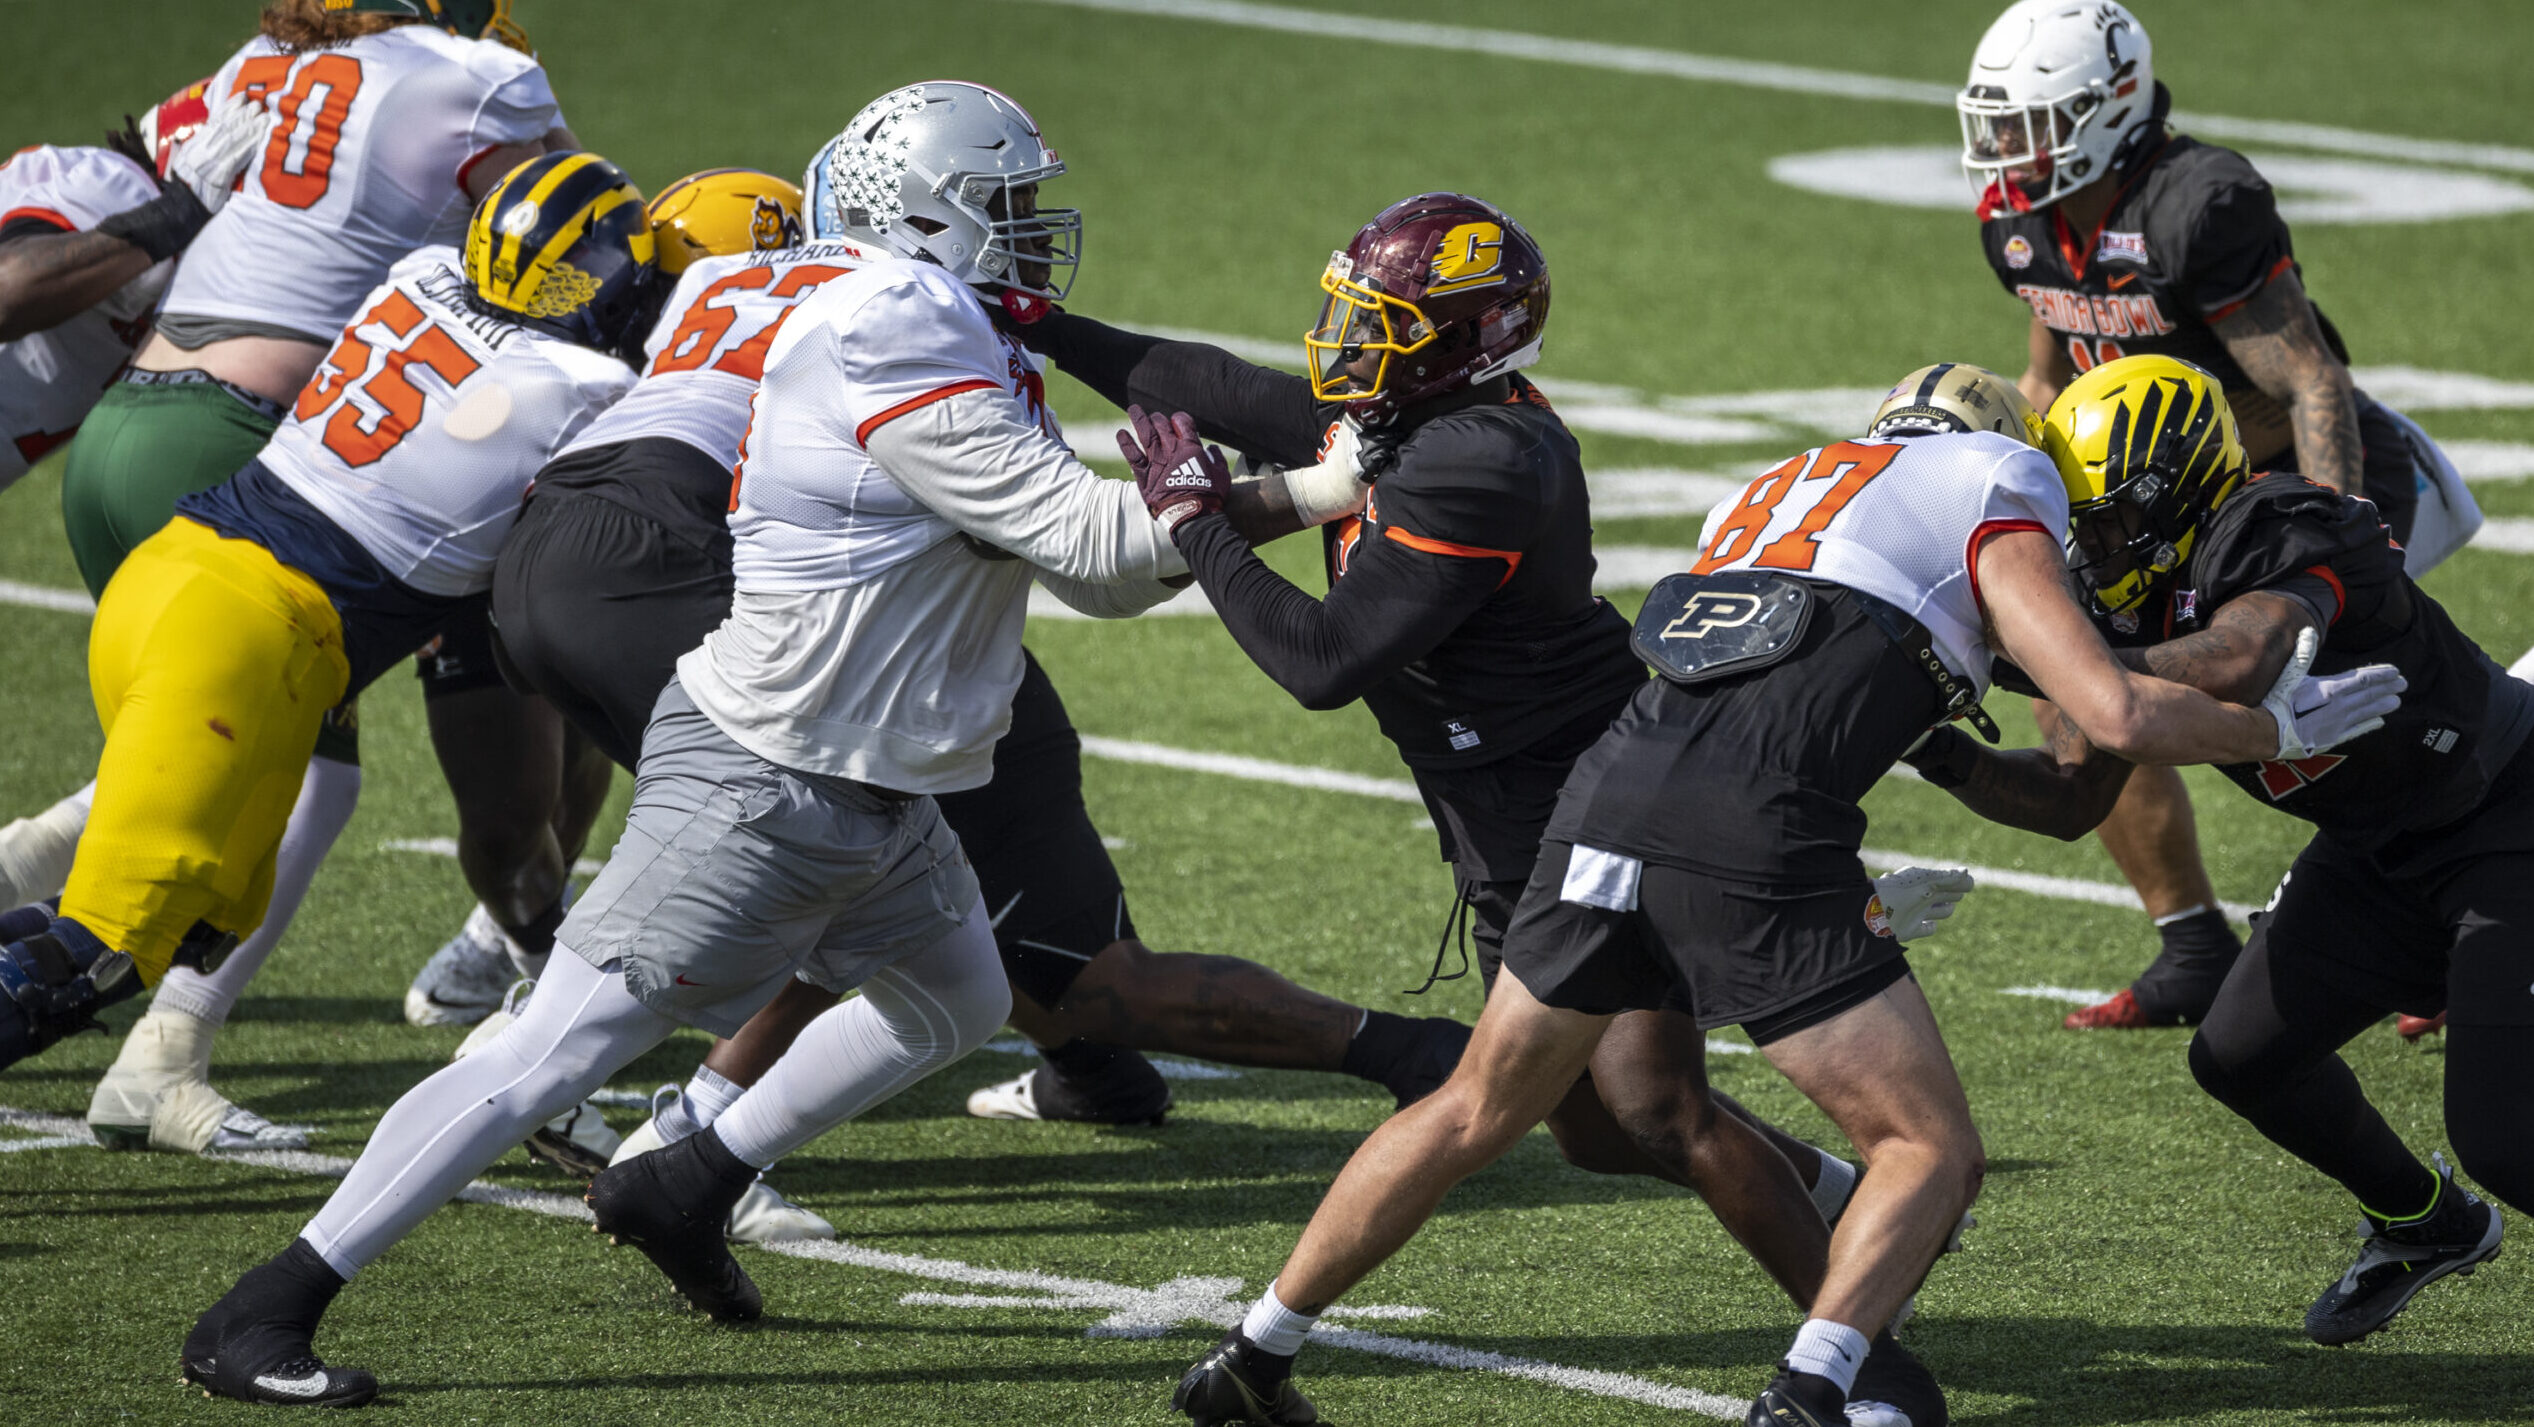 2023 Senior Bowl: Stock Up, Stock Down at Day 1 Practices